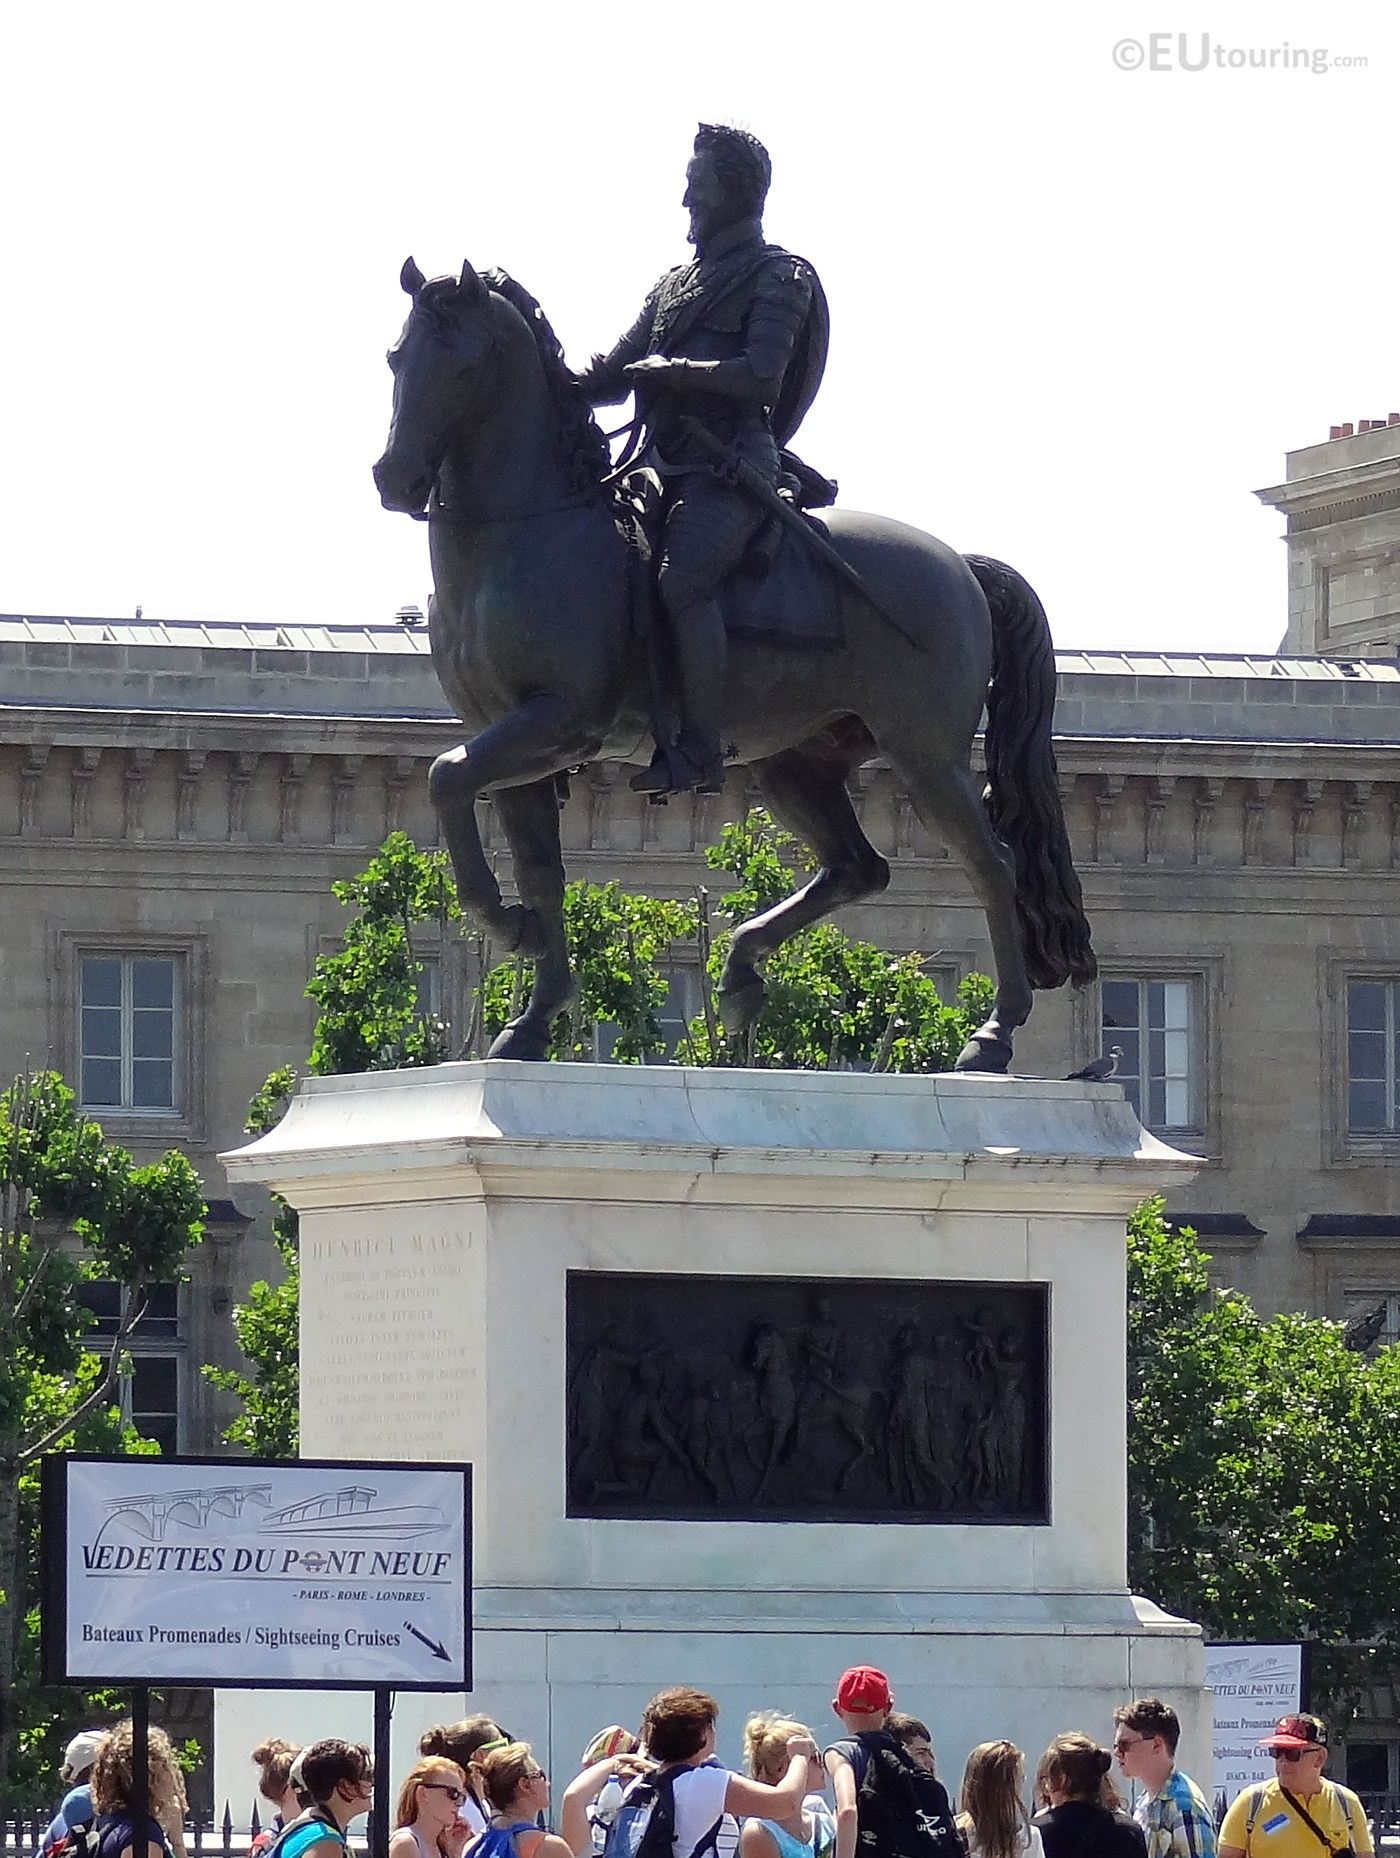 King Henri IV Statue and sign